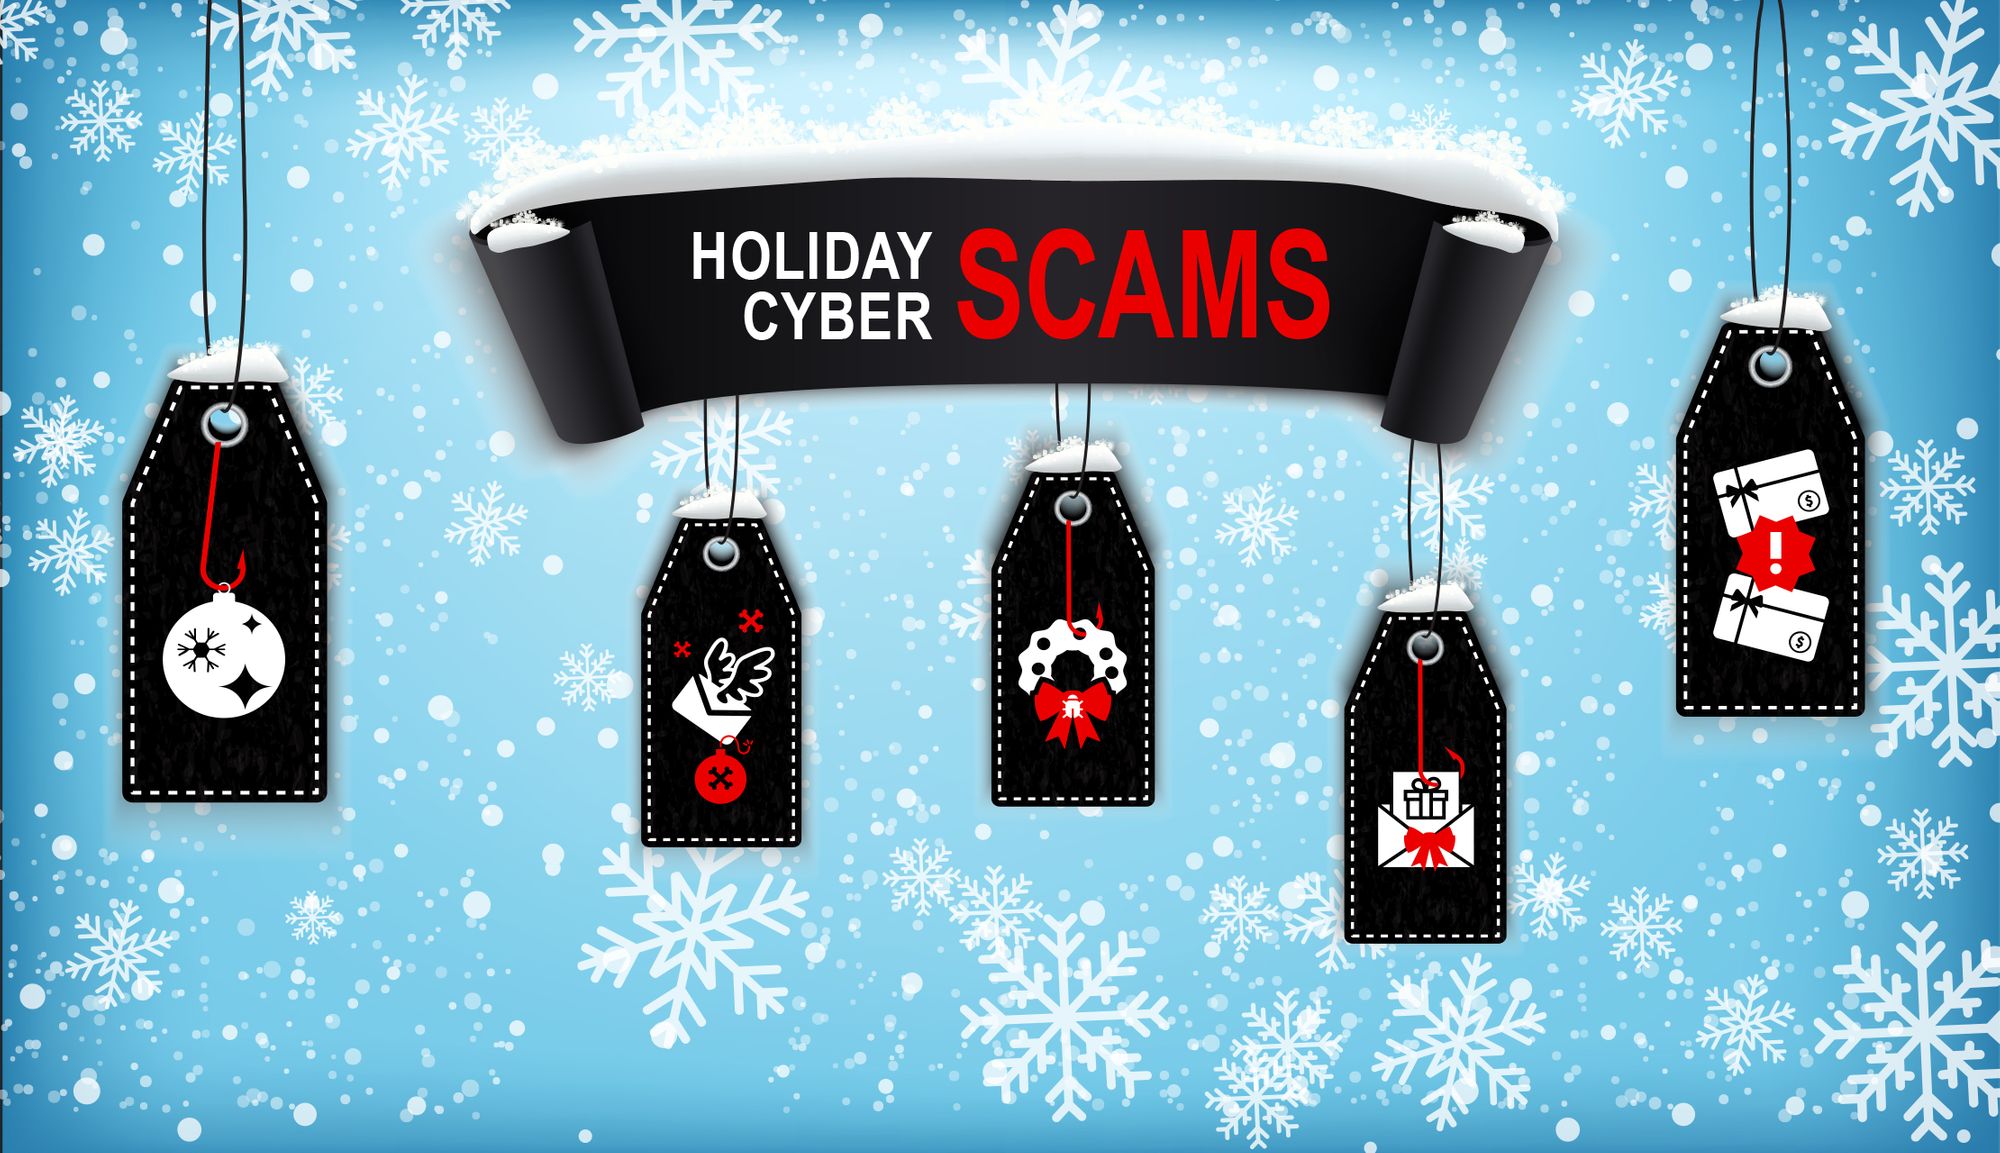 Winter Is Here, and so Are Holiday Cyber Scams